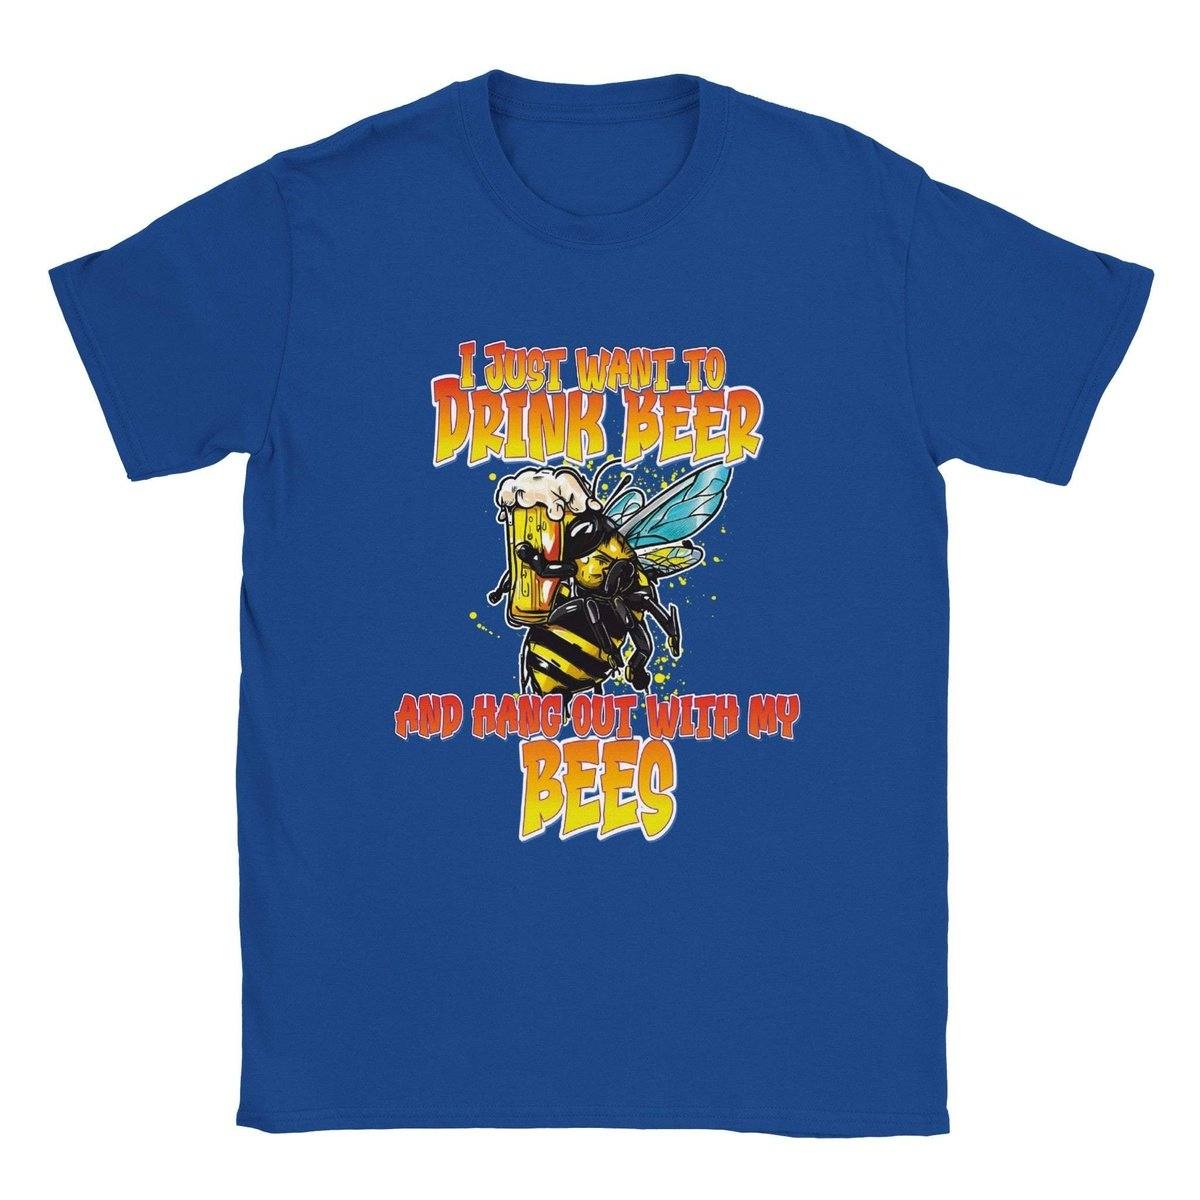 I just want to drink beer and hang out with my bees - Classic Unisex Crewneck T-shirt Adults T-Shirts Unisex Royal / S Bee Clothing Australia